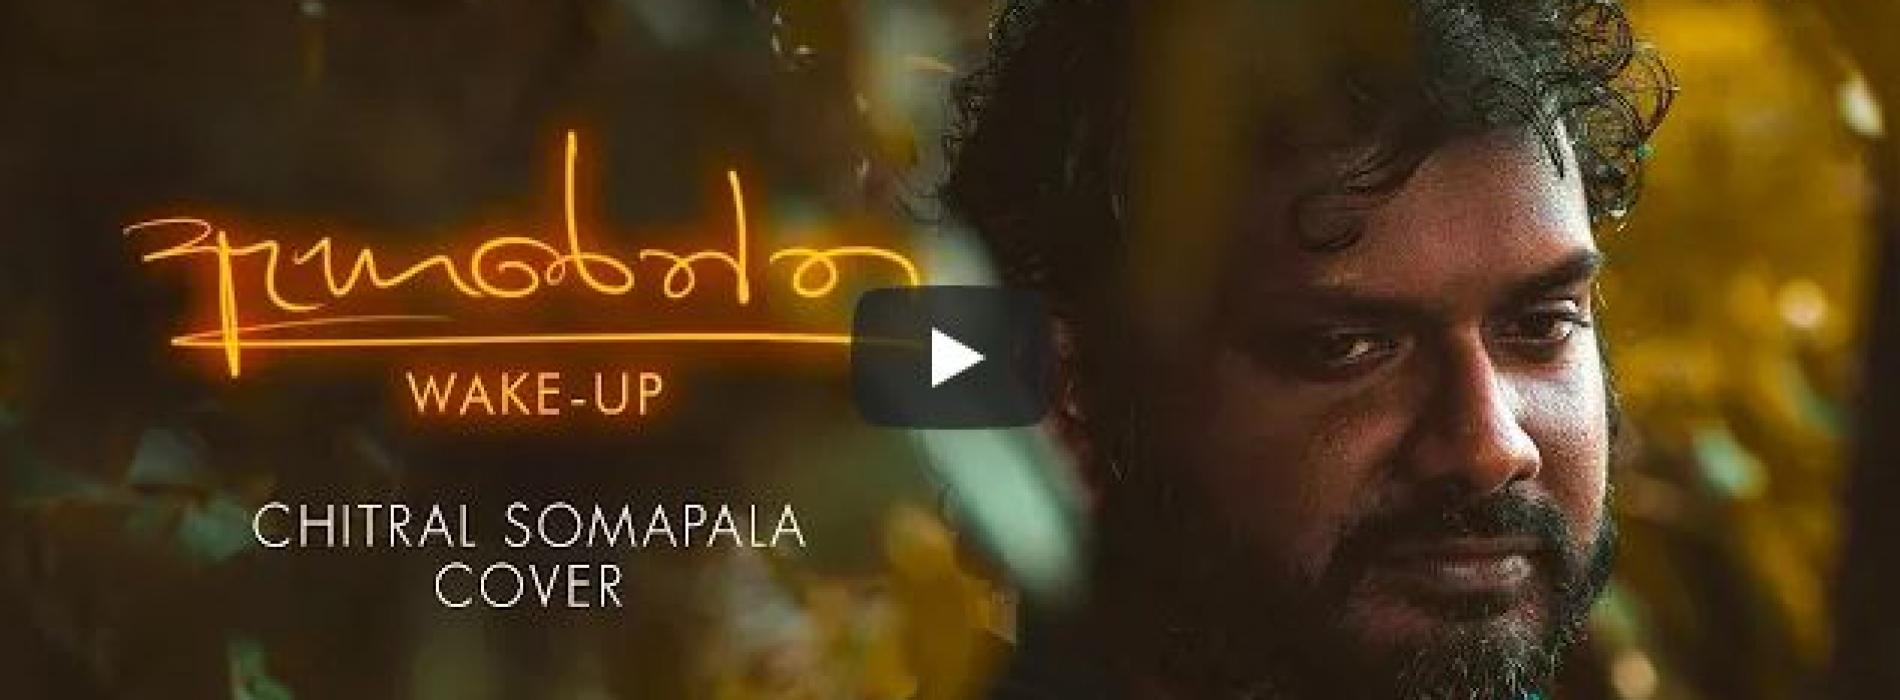 New Music : Aharenna / ඇහැරෙන්න / Wake-up (Chitral Chity Somapala Cover) By Sanjeev Niles